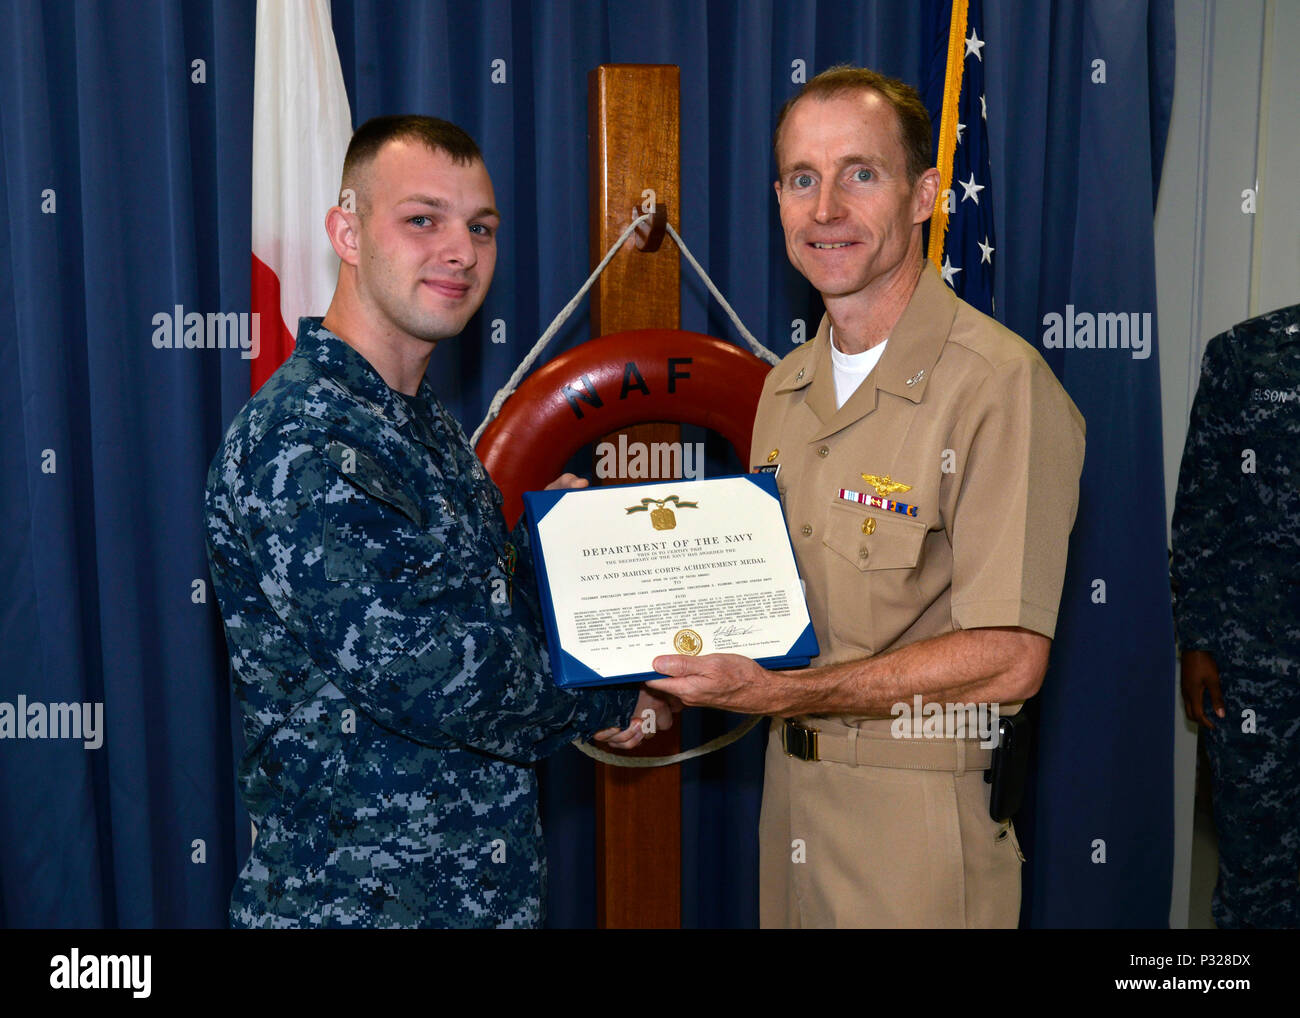 160825-N-OK605-005 MISAWA, Japan (June, 30 2016) Culinary Specialist 2nd Class Christopher Plowden, from New York City, receives a Navy and Marine Corps Achievement medal from Capt. Keith Henry, commanding officer Naval Air Facility Misawa. (U.S. Navy Photo by Mass Communication Specialist 2nd Class Samuel Weldin/Released) Stock Photo